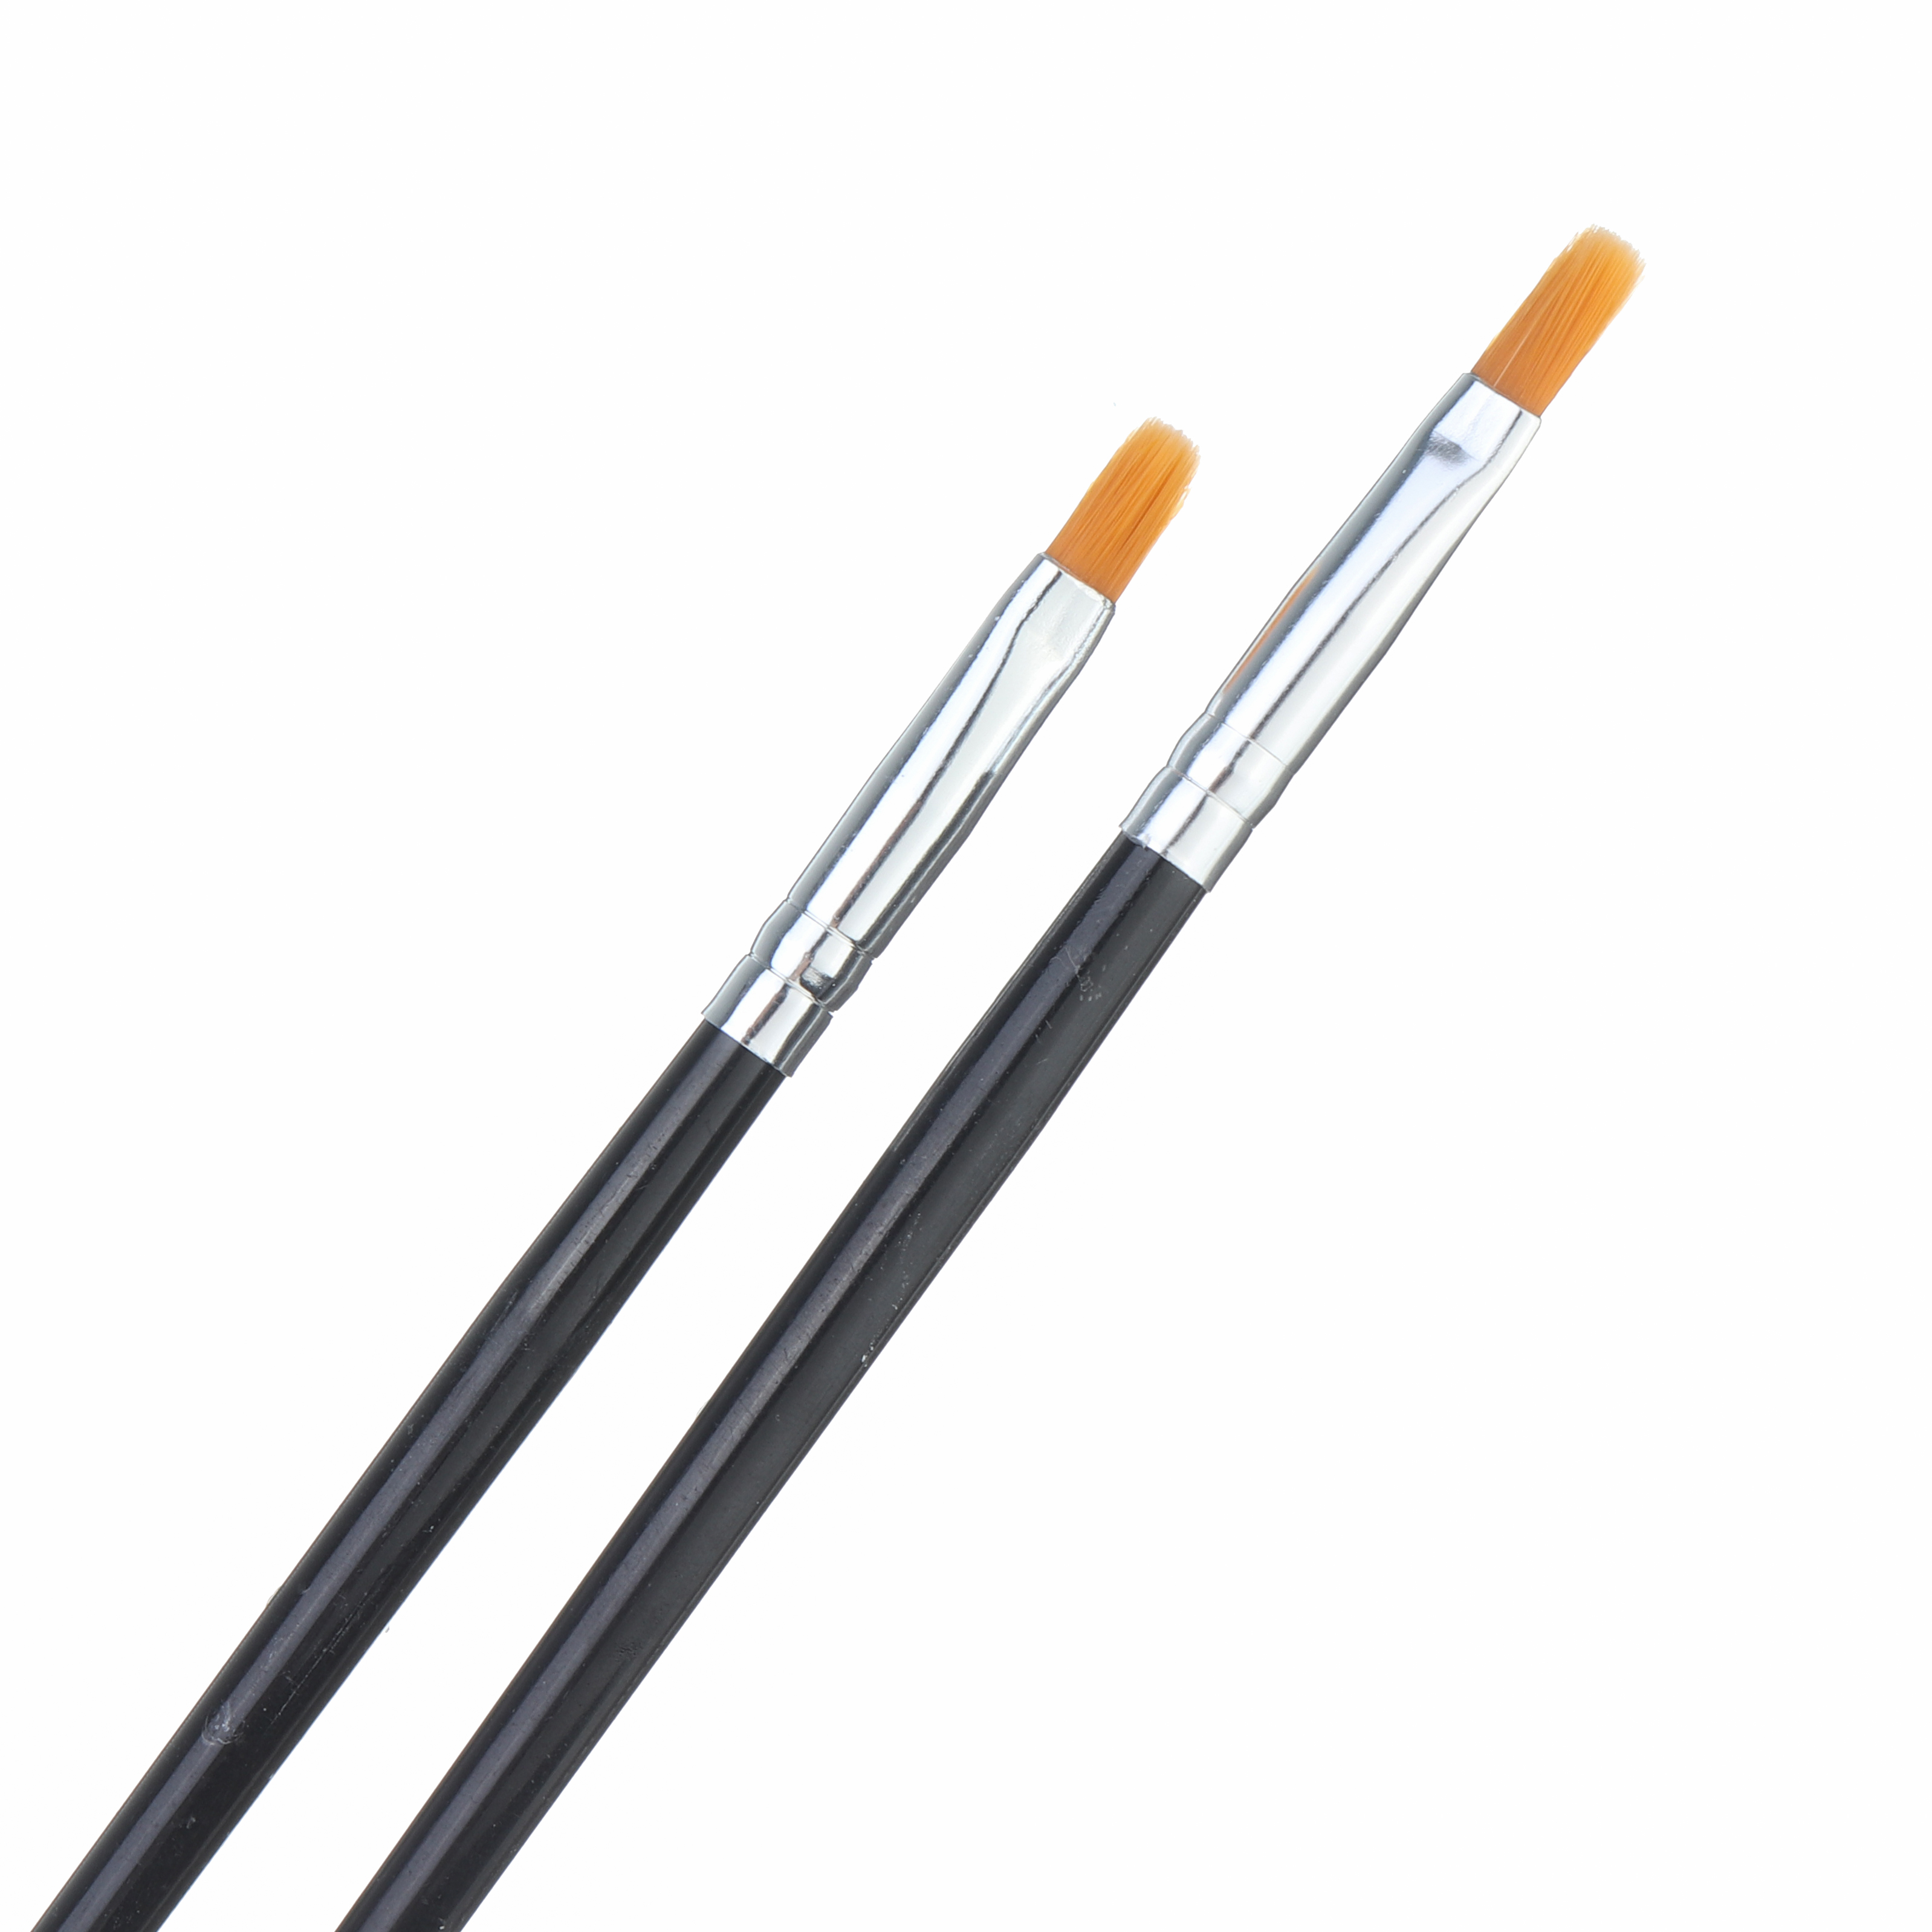 2Pcs-Model-Color-Pen-Flat-Brush-Hand-Painting-Tools-for-Oil-Painting-Pigments-1488409-2